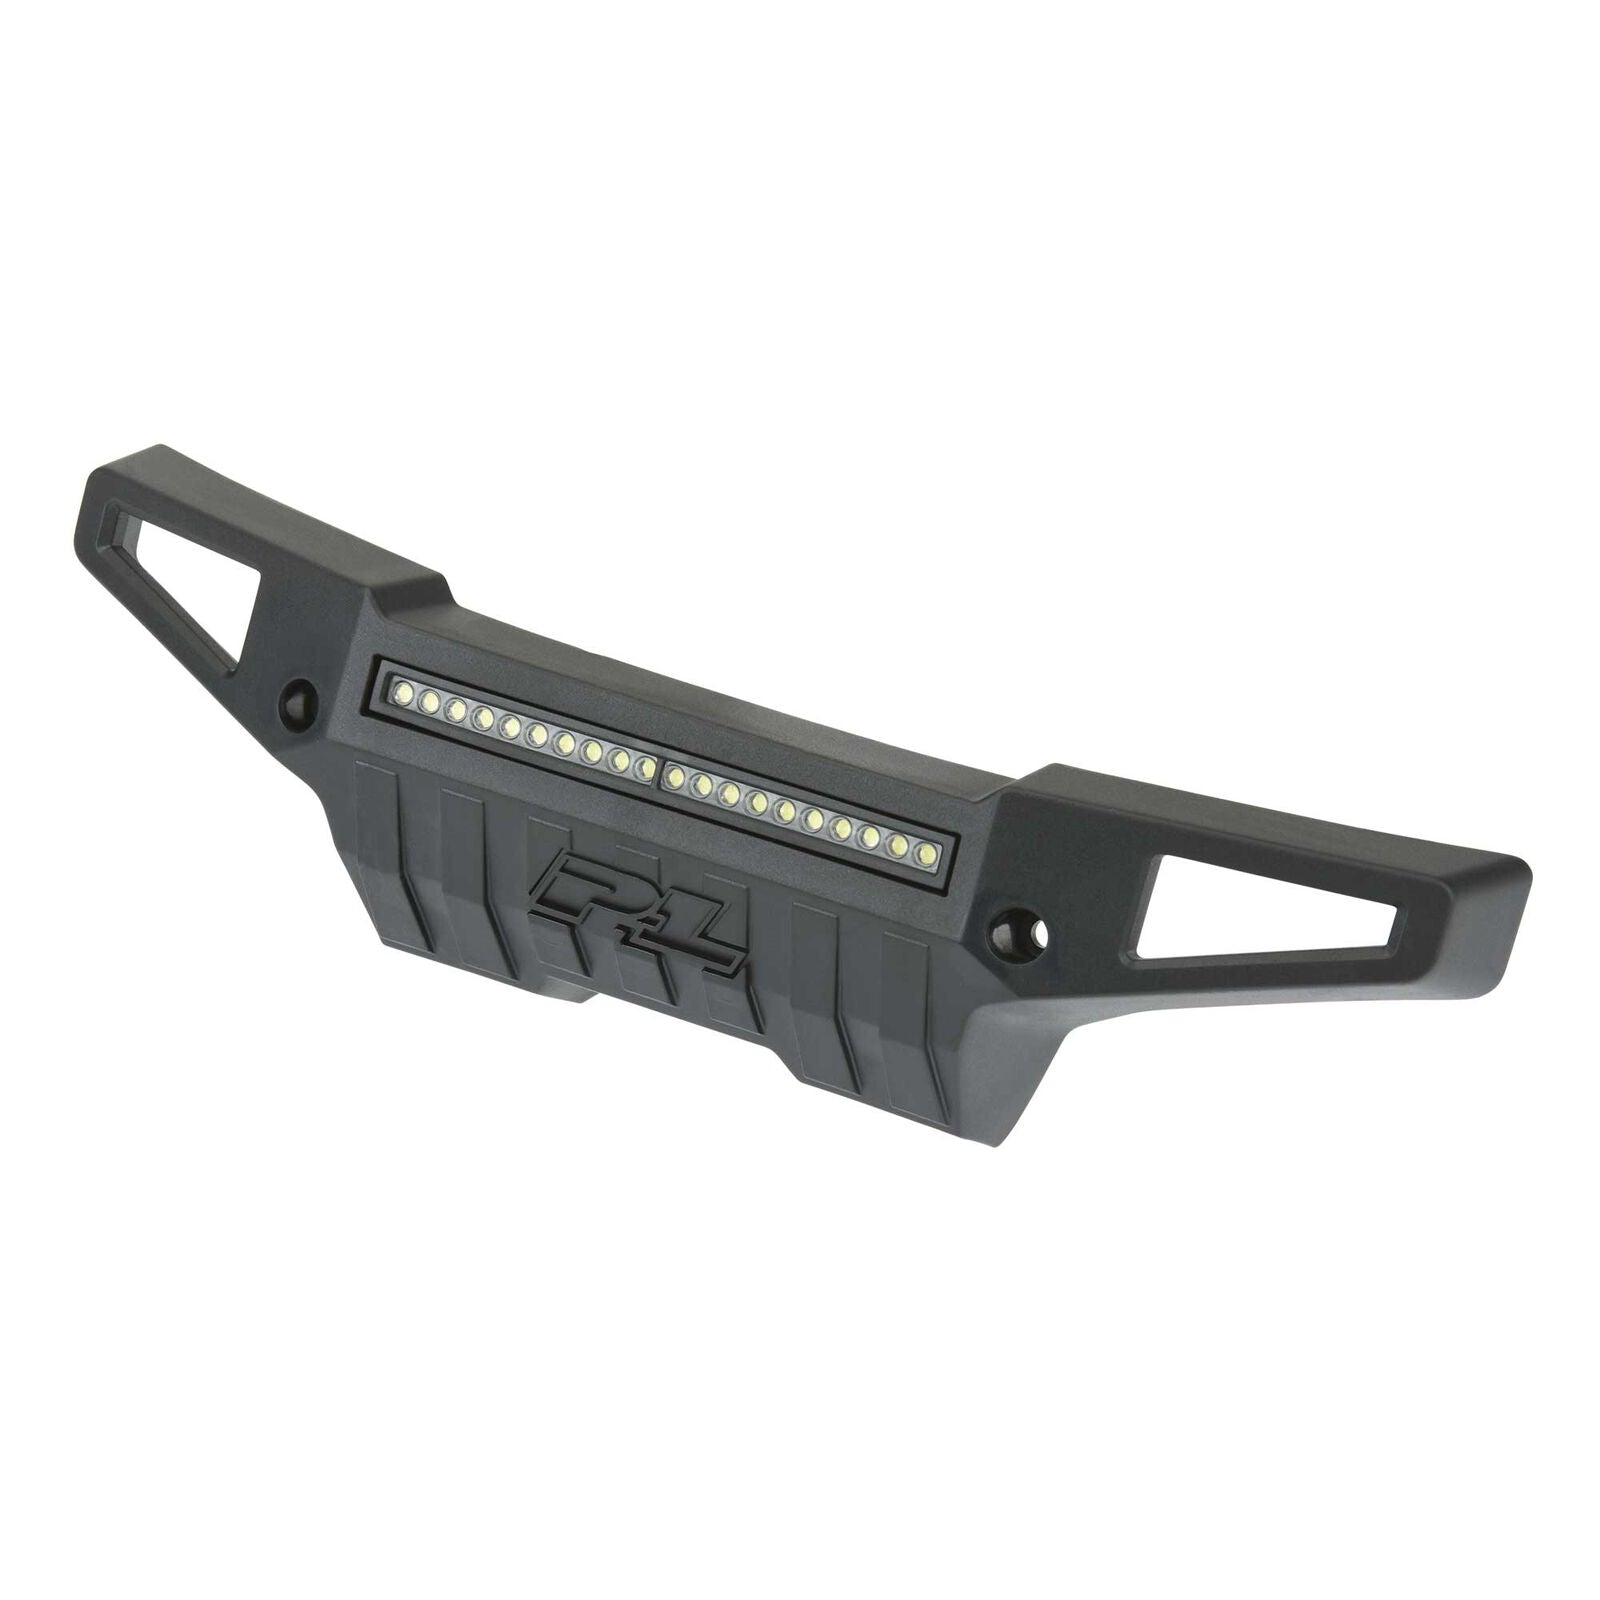 PROLINE 6342-01 1/5 PRO-Armor Front Bumper with 4" LED Light Bar for X-MAXX